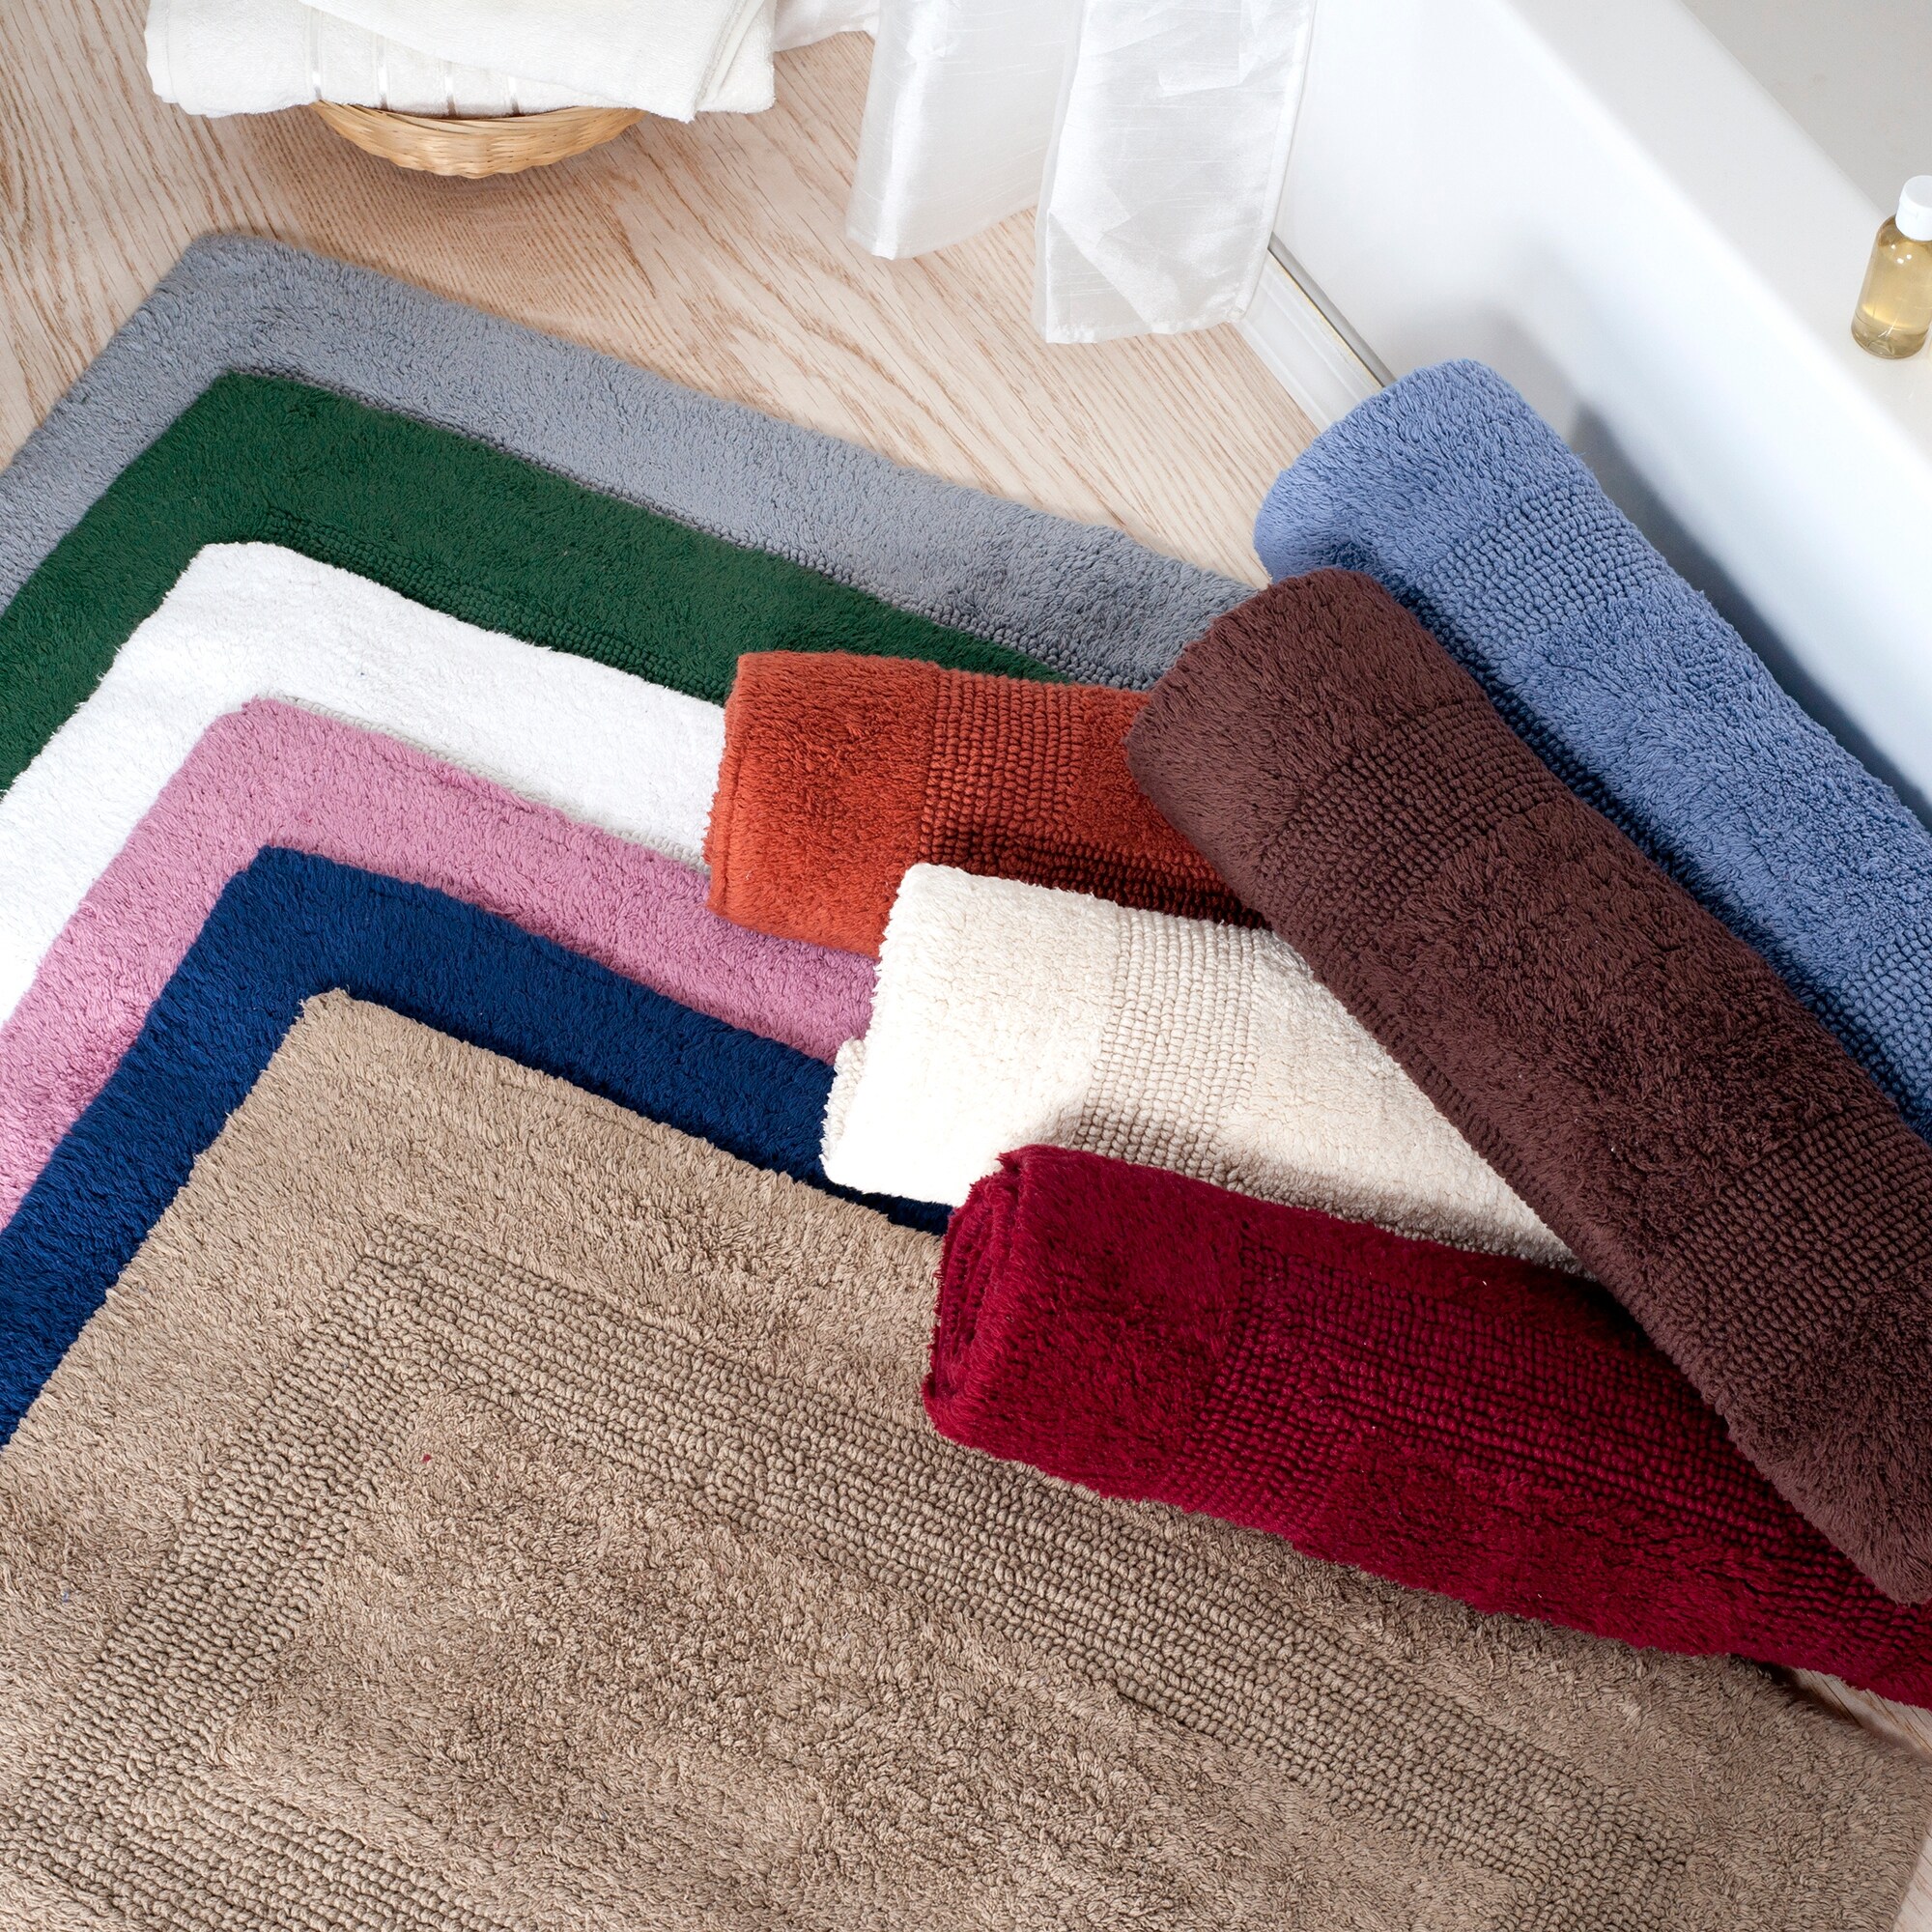 https://ak1.ostkcdn.com/images/products/is/images/direct/45cd09d0cd03003103b65df2ff801a2b03eb5a33/Cotton-Bath-Mat---Reversible-24x60-Inch-Long-Bathroom-Runner---Machine-Washable-Rug-by-Lavish-Home-%28Blue%29.jpg